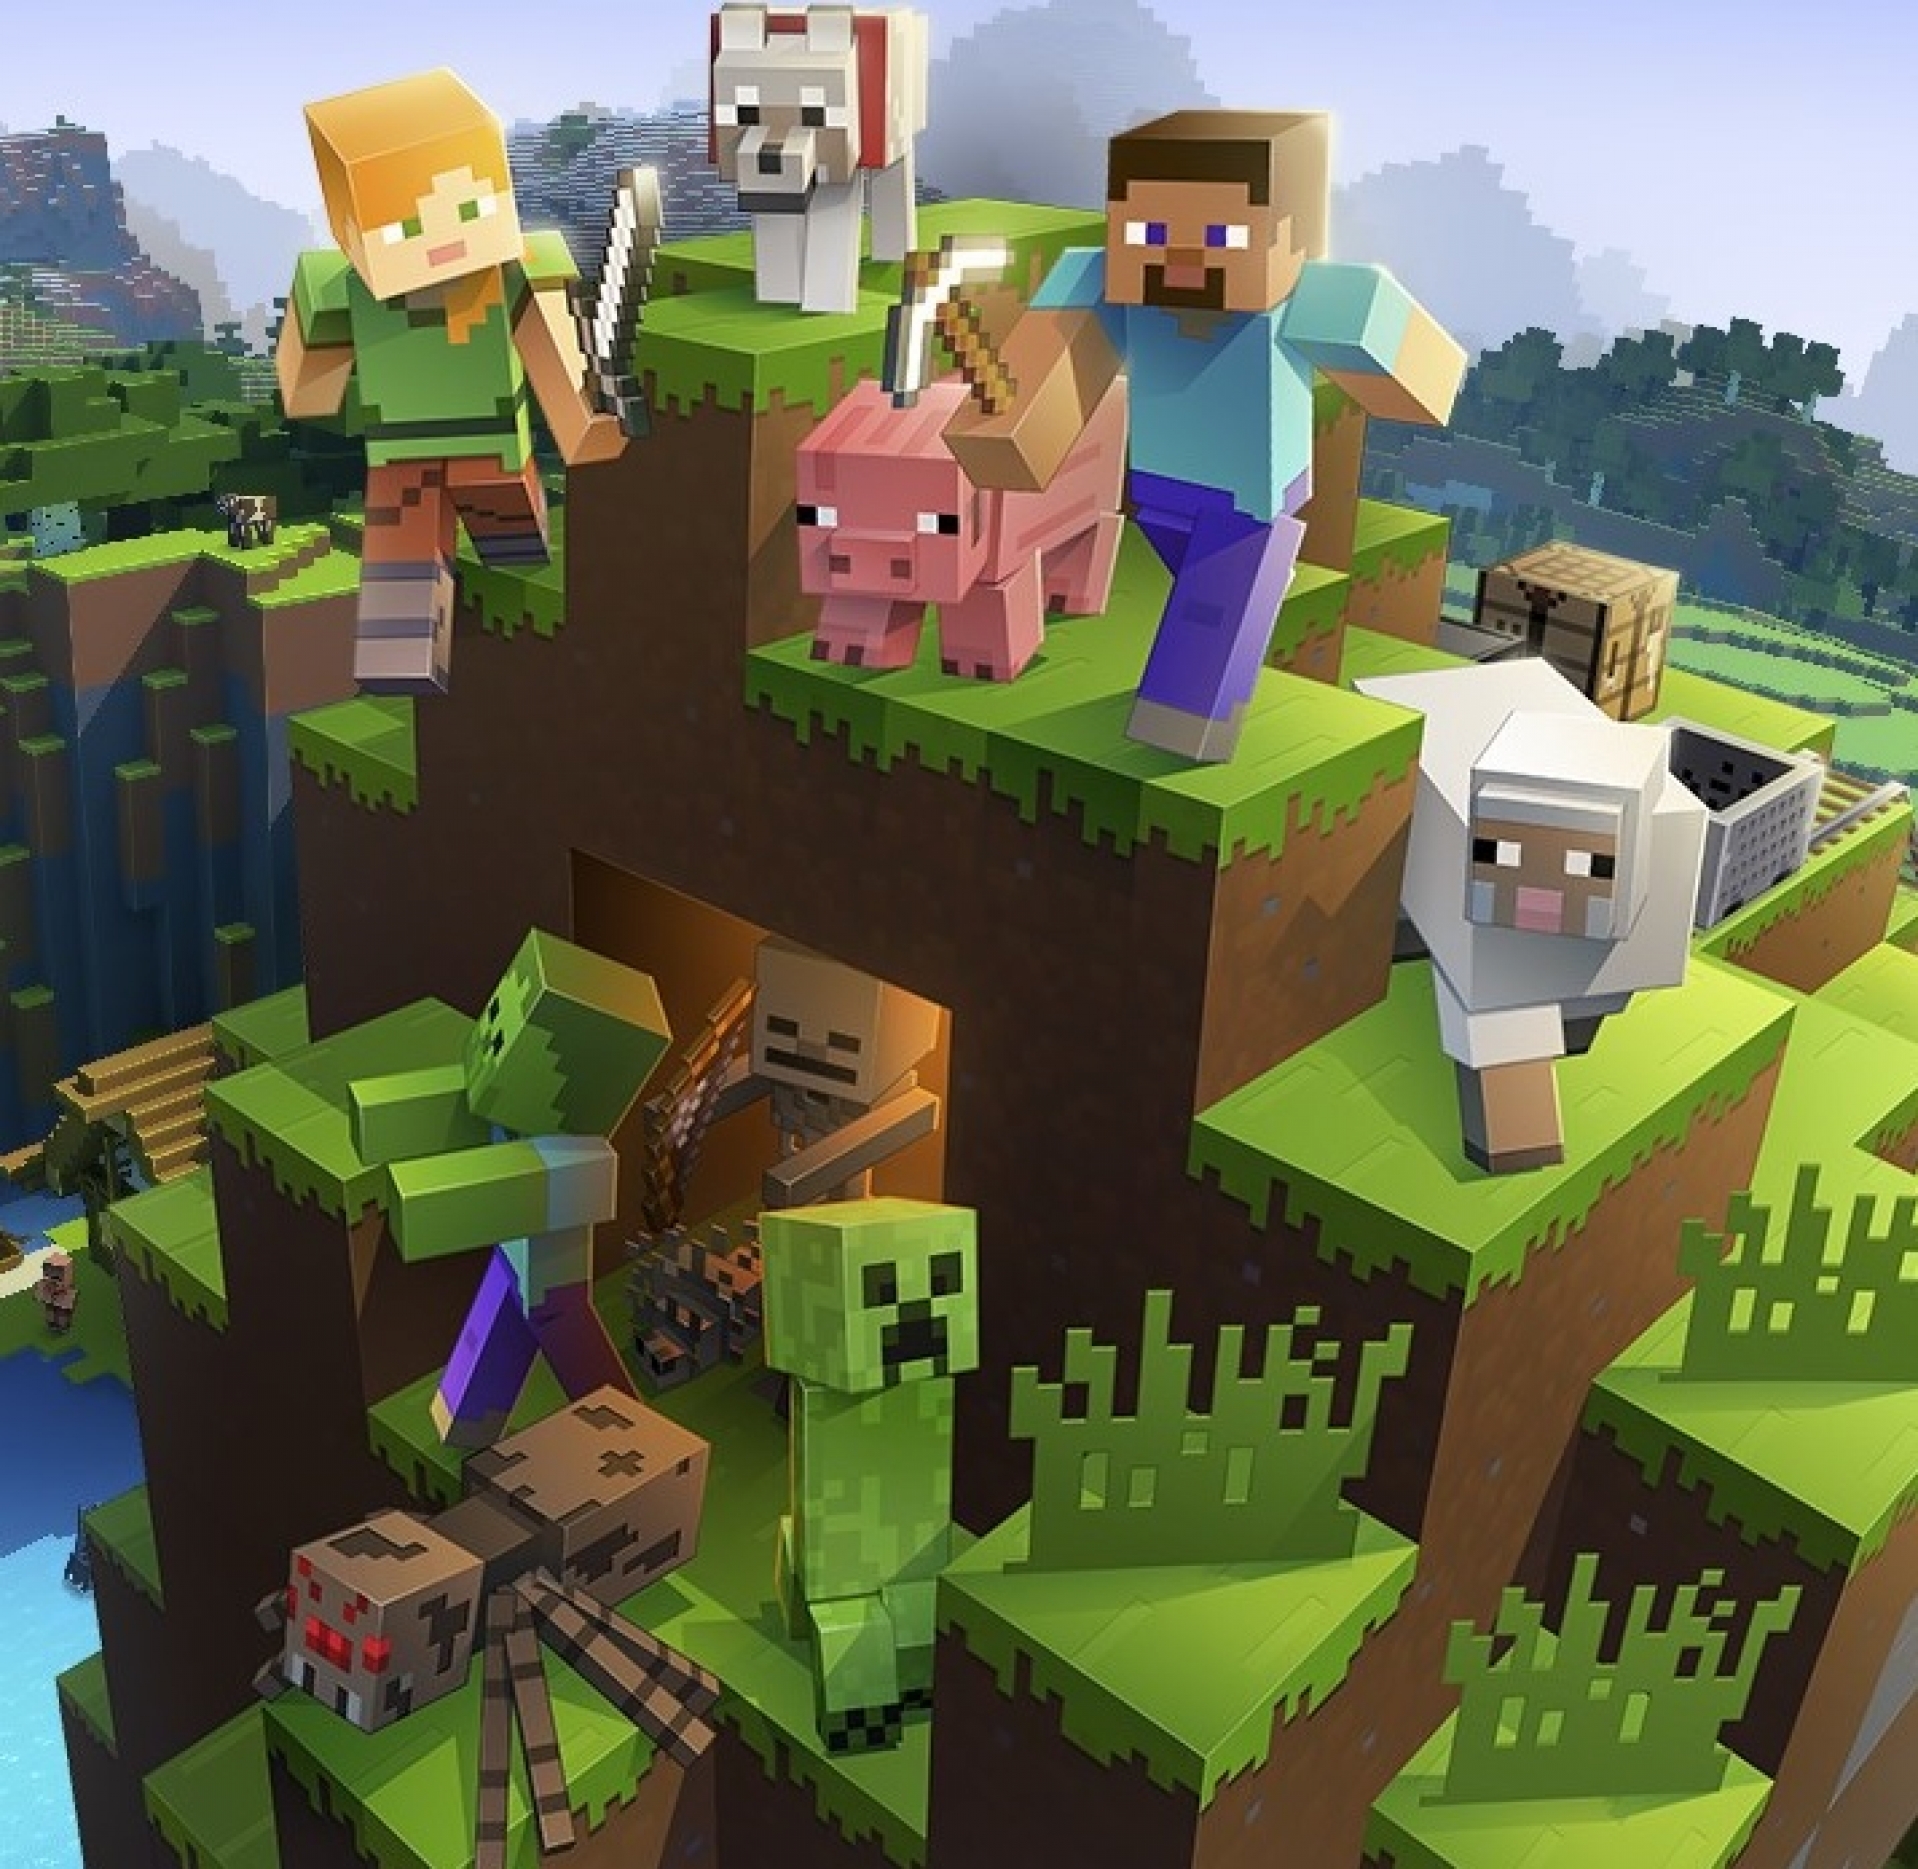 Ancient Minecraft Java Players! Now's your last chance to redeem a free copy of the Windows 10 version!